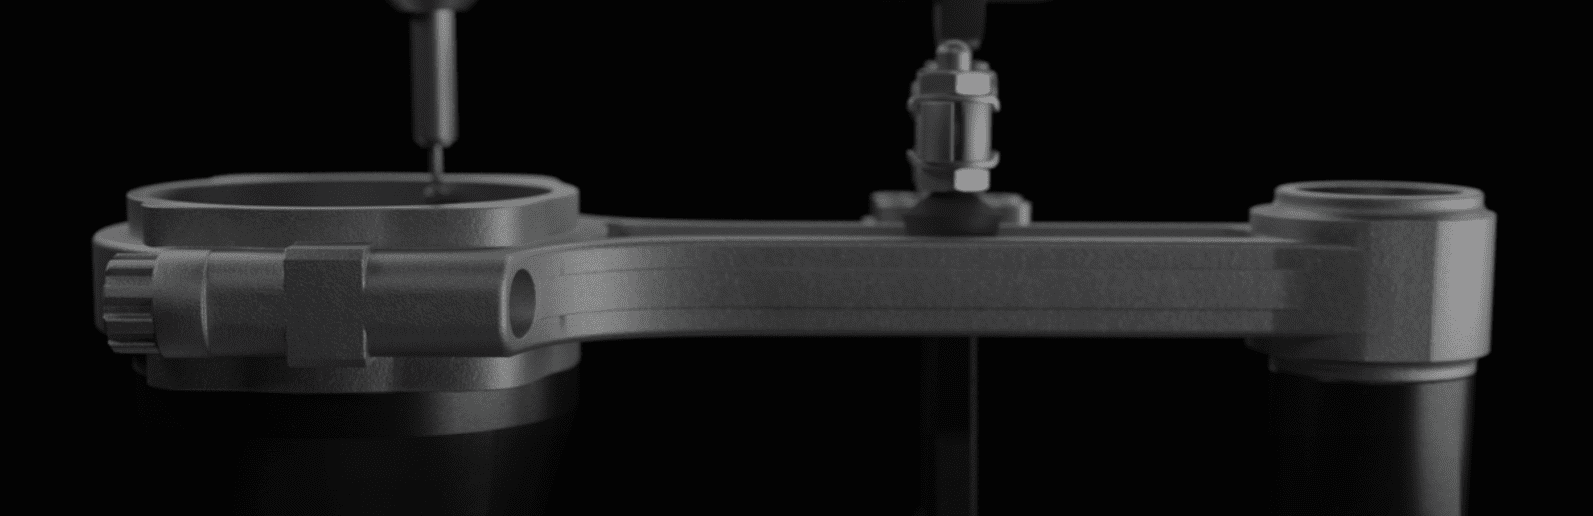 Markforged Materials Background Image